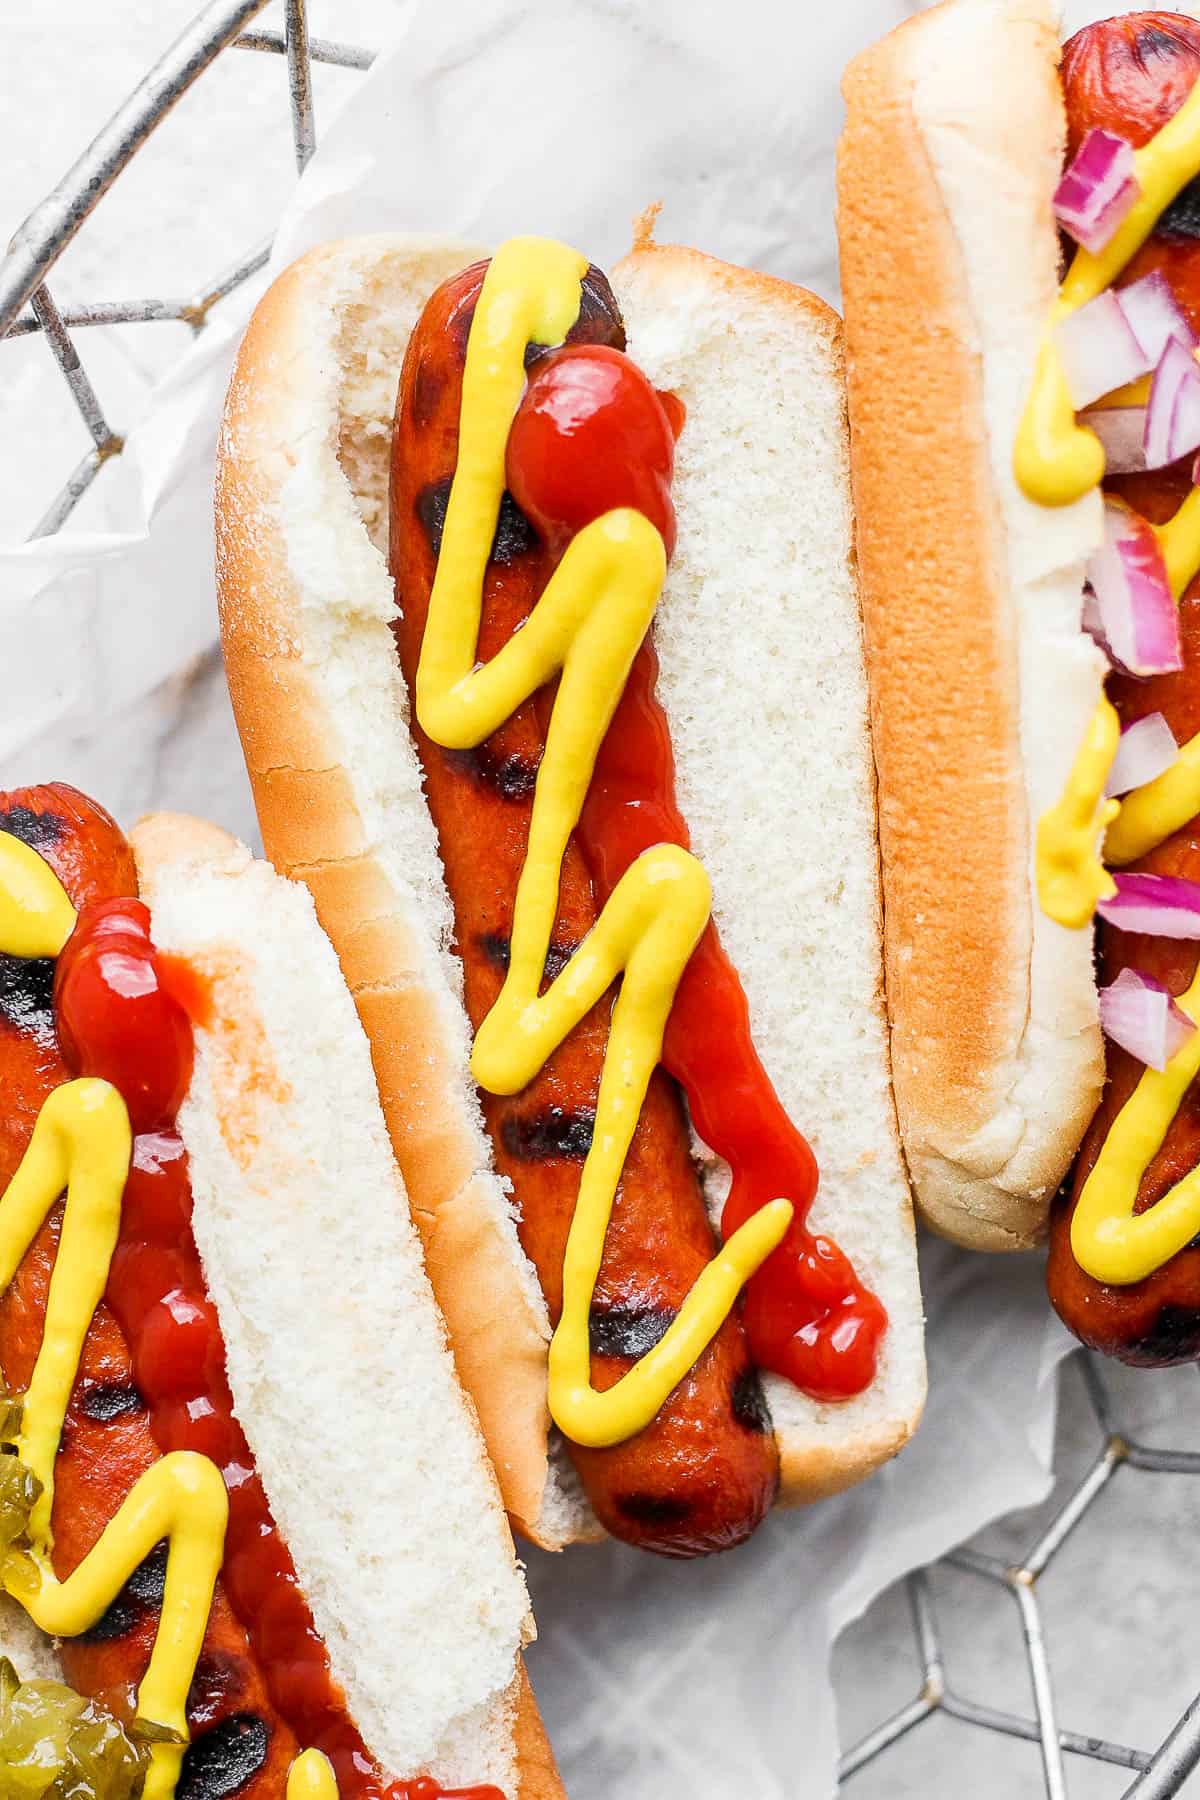 Three smoked hot dogs topped with ketchup and mustard in a parchment lined wire basket.